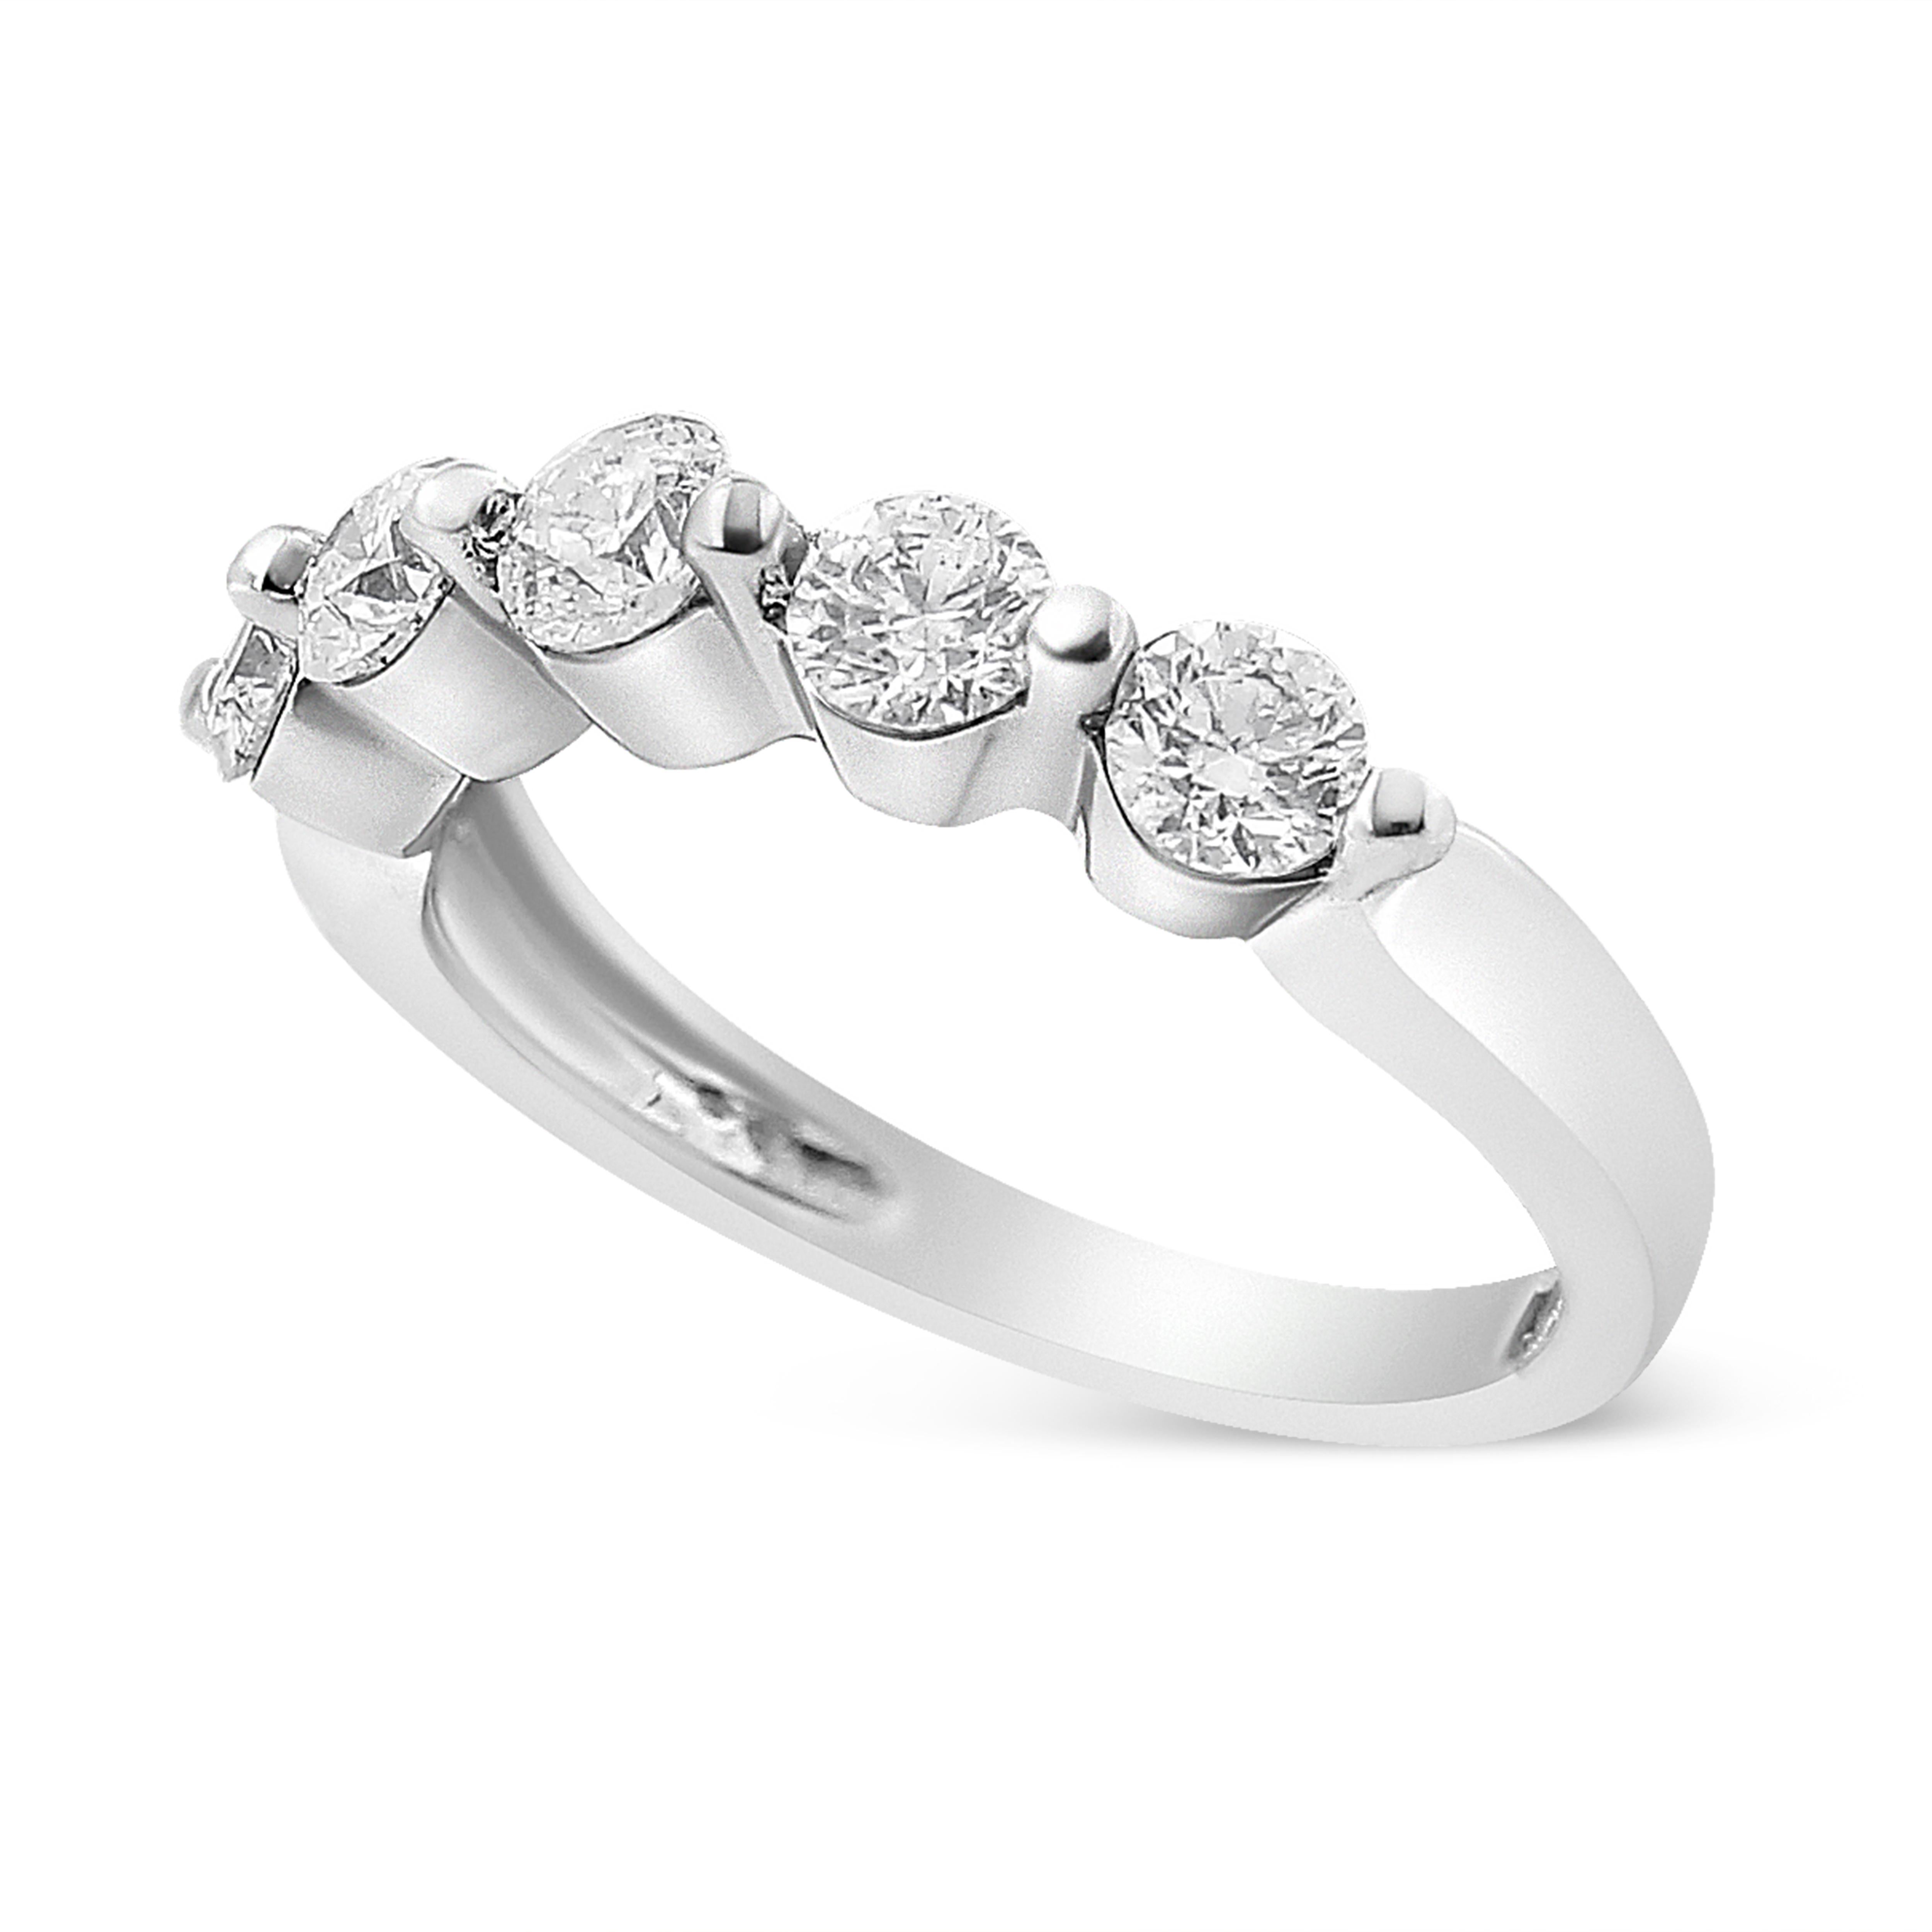 Why only get one diamond when you can have five? Featuring five brilliant round-cut diamonds, the ring shines bright like no other. Set in 14K white gold, take a closer look at each natural stone and you’ll notice that they’re set in a two-prong